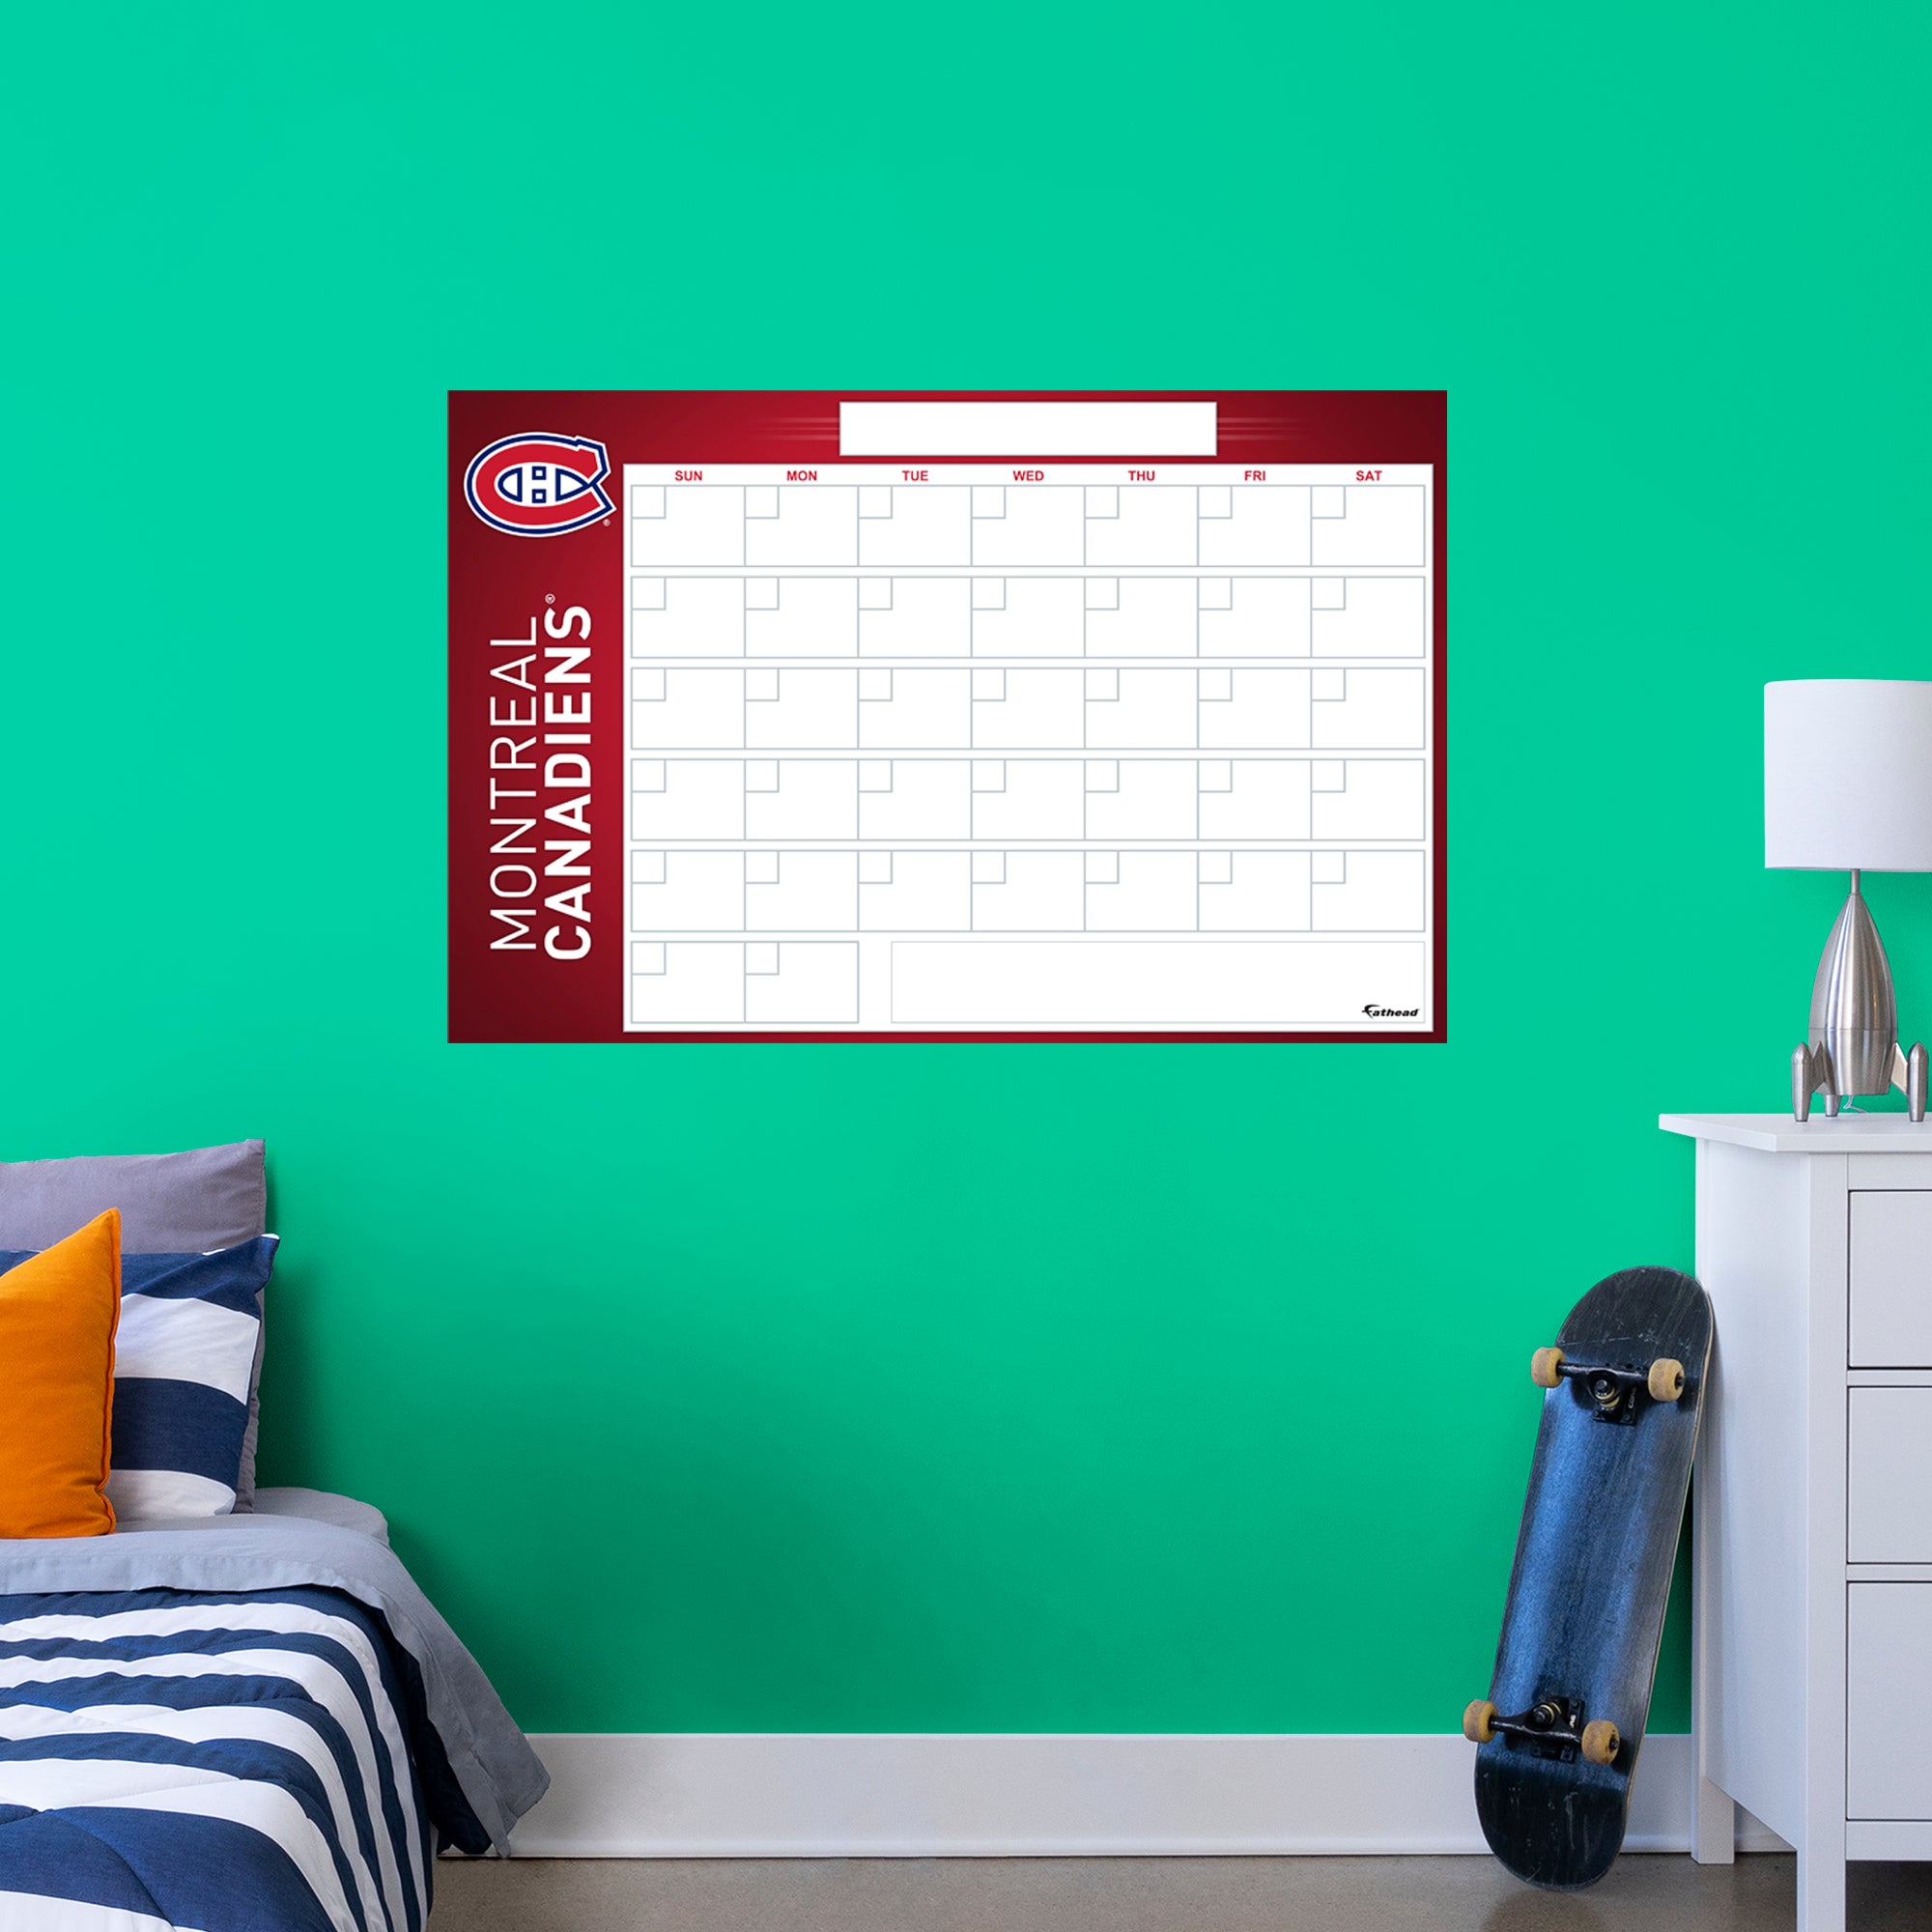 Montreal Canadiens Dry Erase Calendar - Officially Licensed NHL Removable Wall Decal Giant Decal (57"W x 34"H) by Fathead | Viny